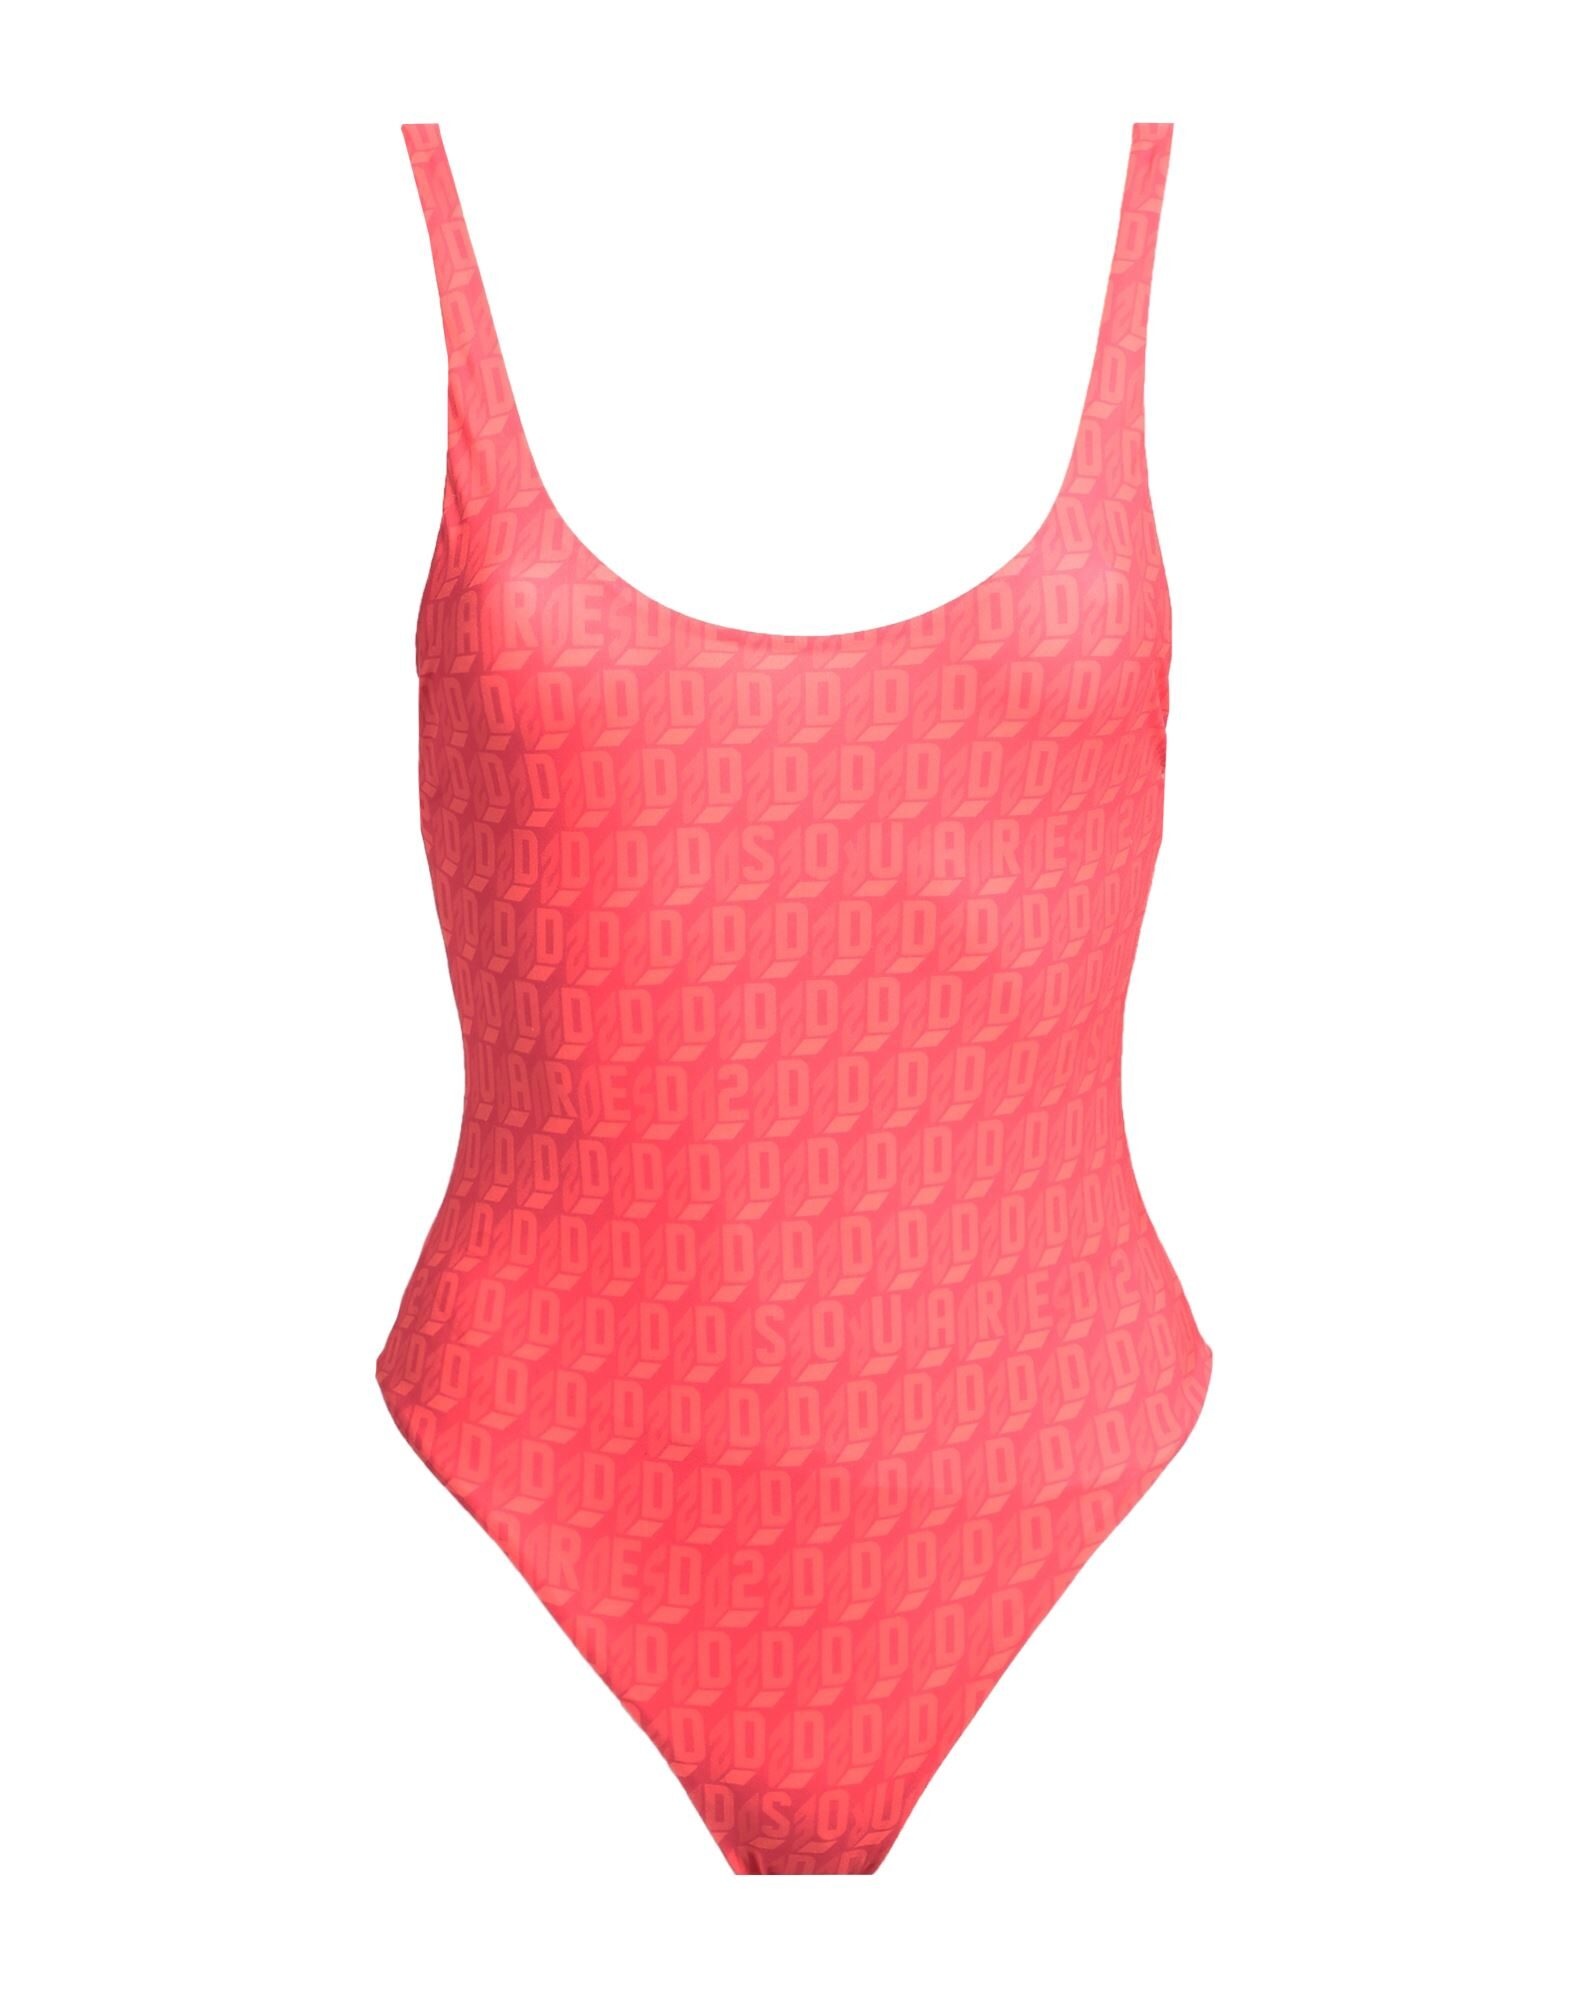 Red Women's One-piece Swimsuits - 1